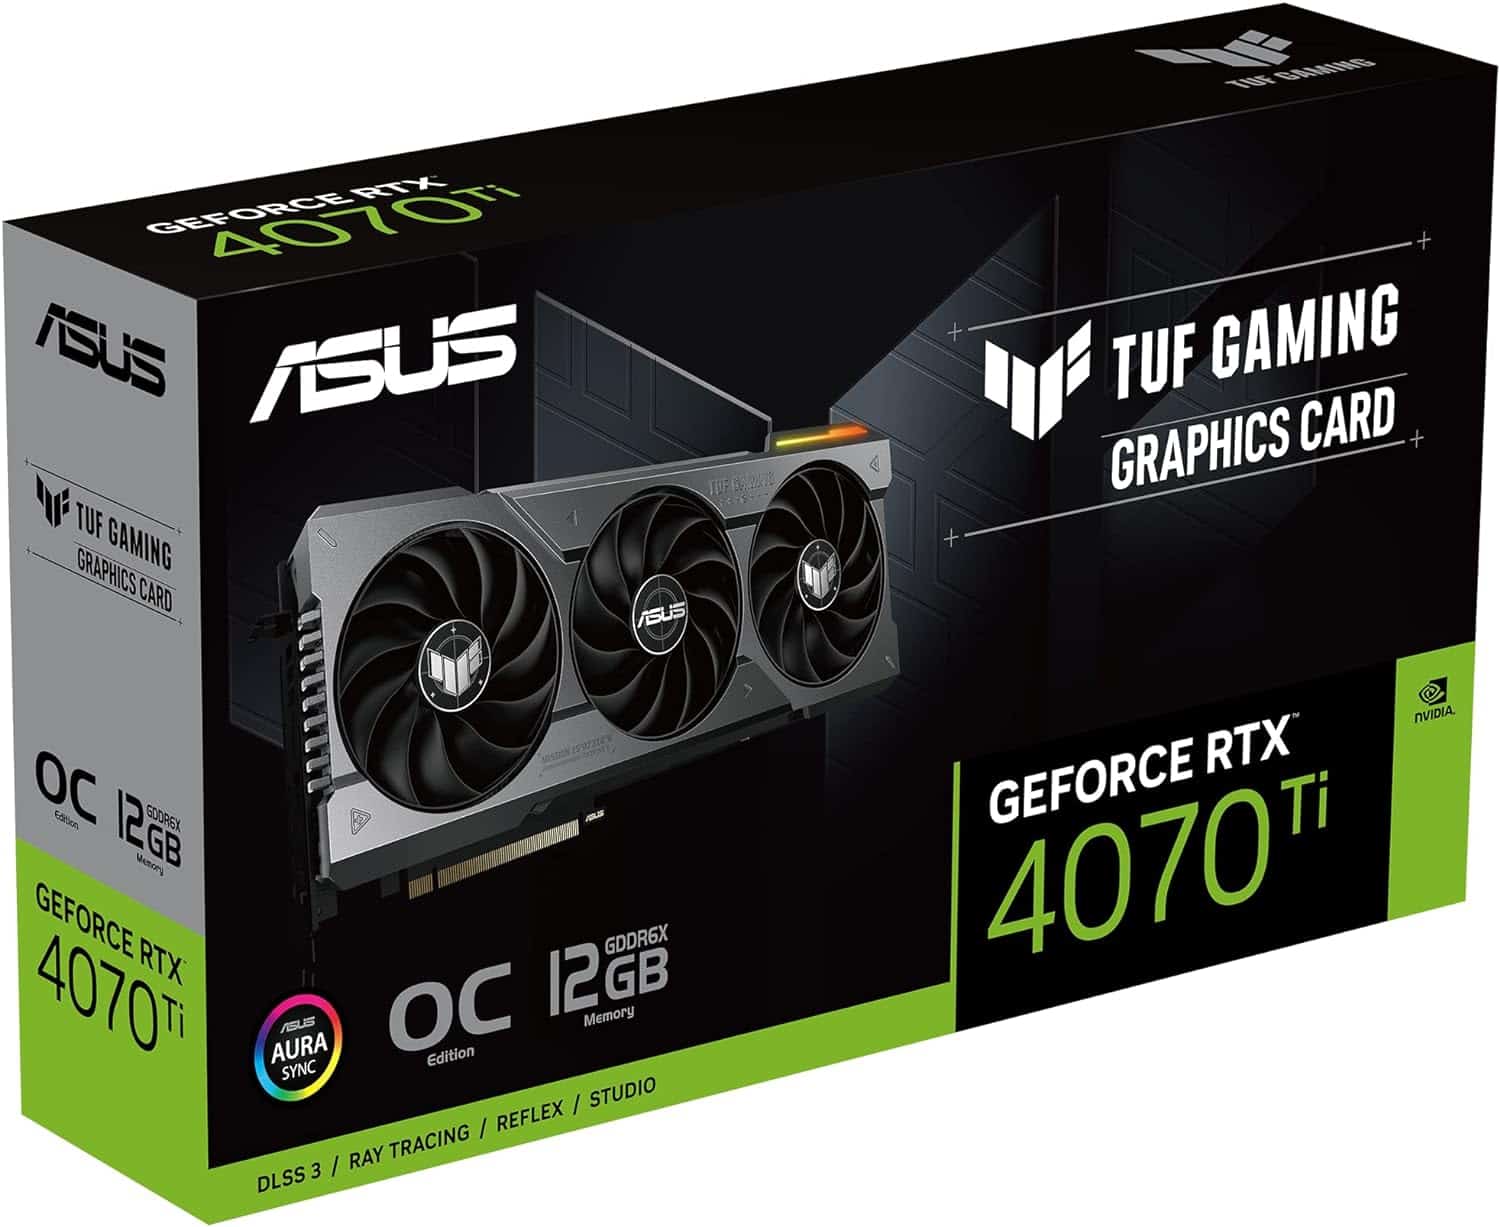 GeForce RTX 4070 Ti Super by Asus: 9 cards, 3 different designs 